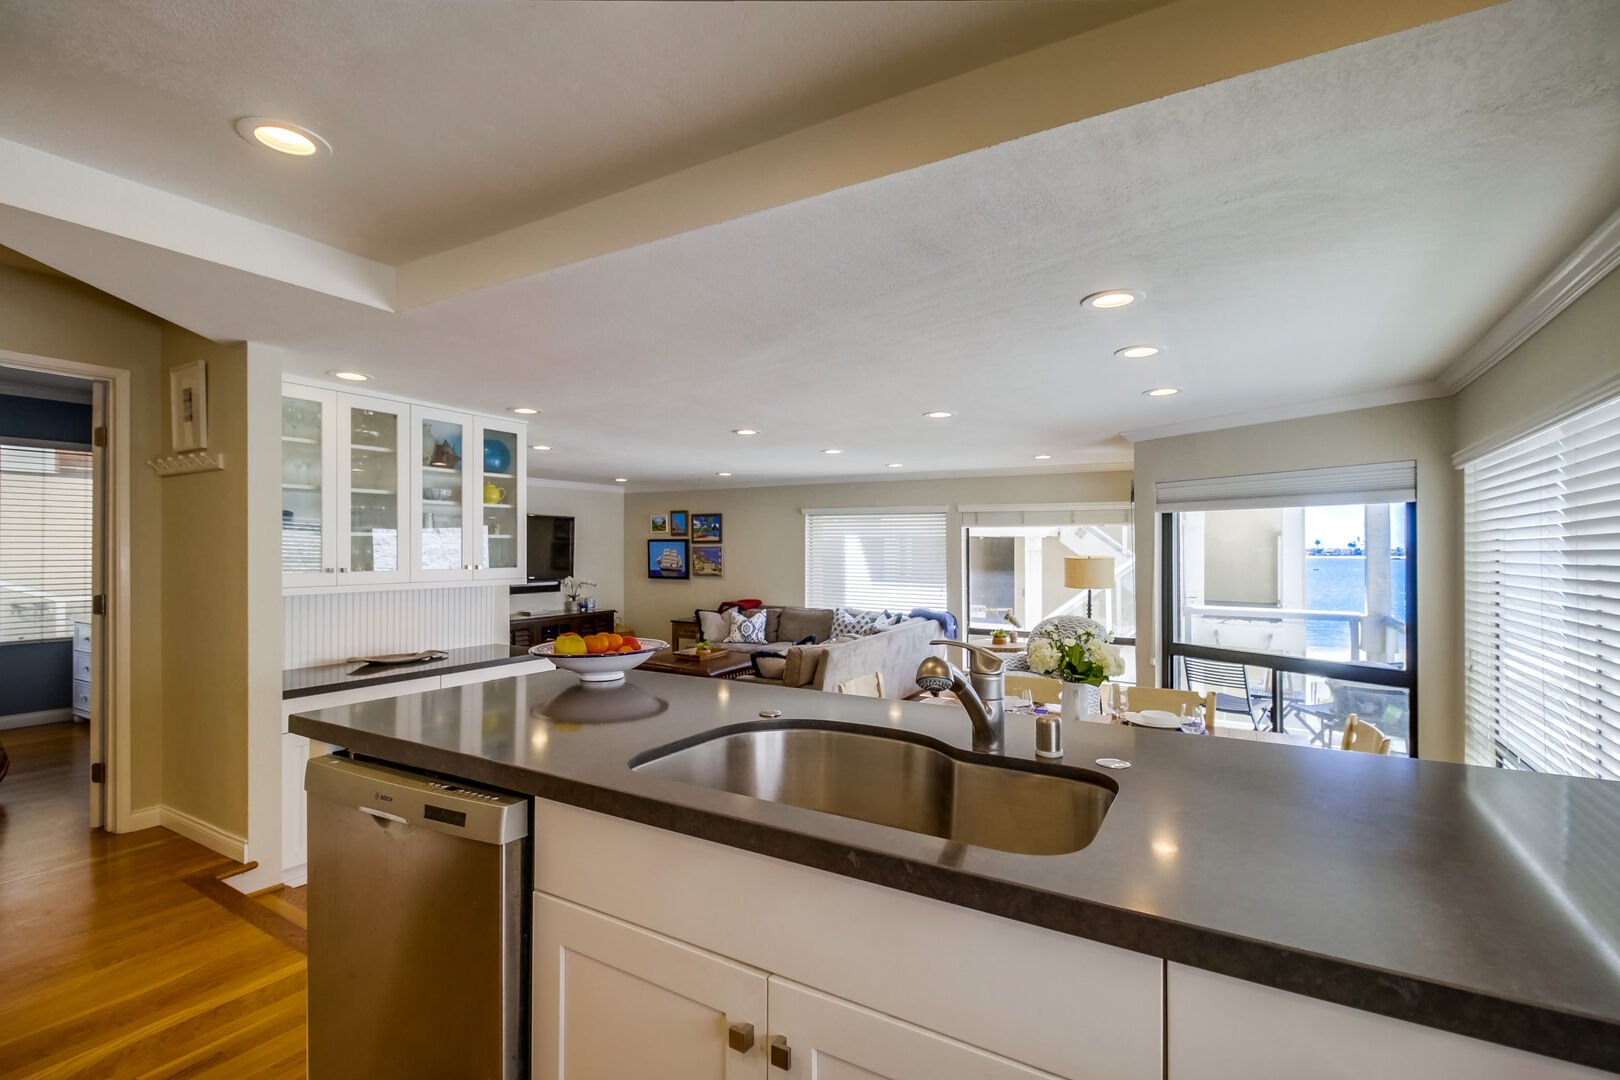 Open kitchen with recessed lighting